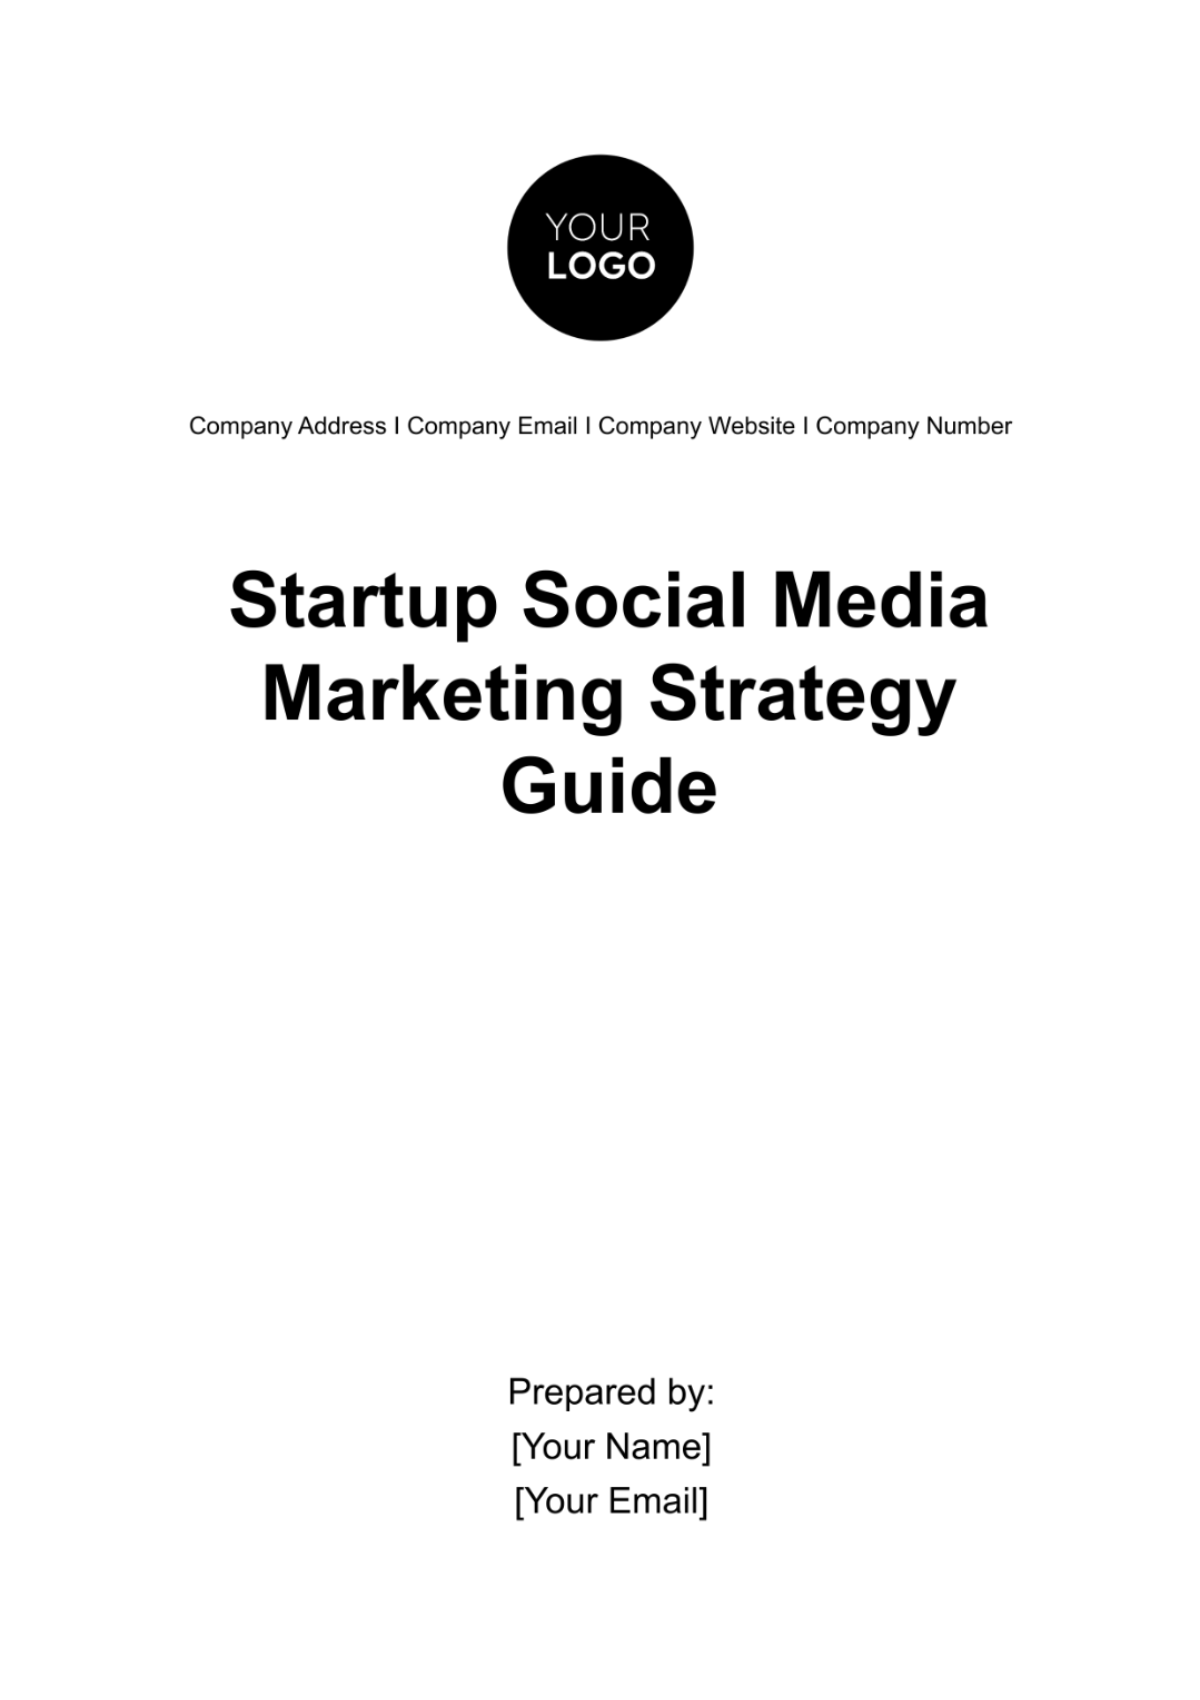 Startup Social Media Marketing Strategy Guide Template